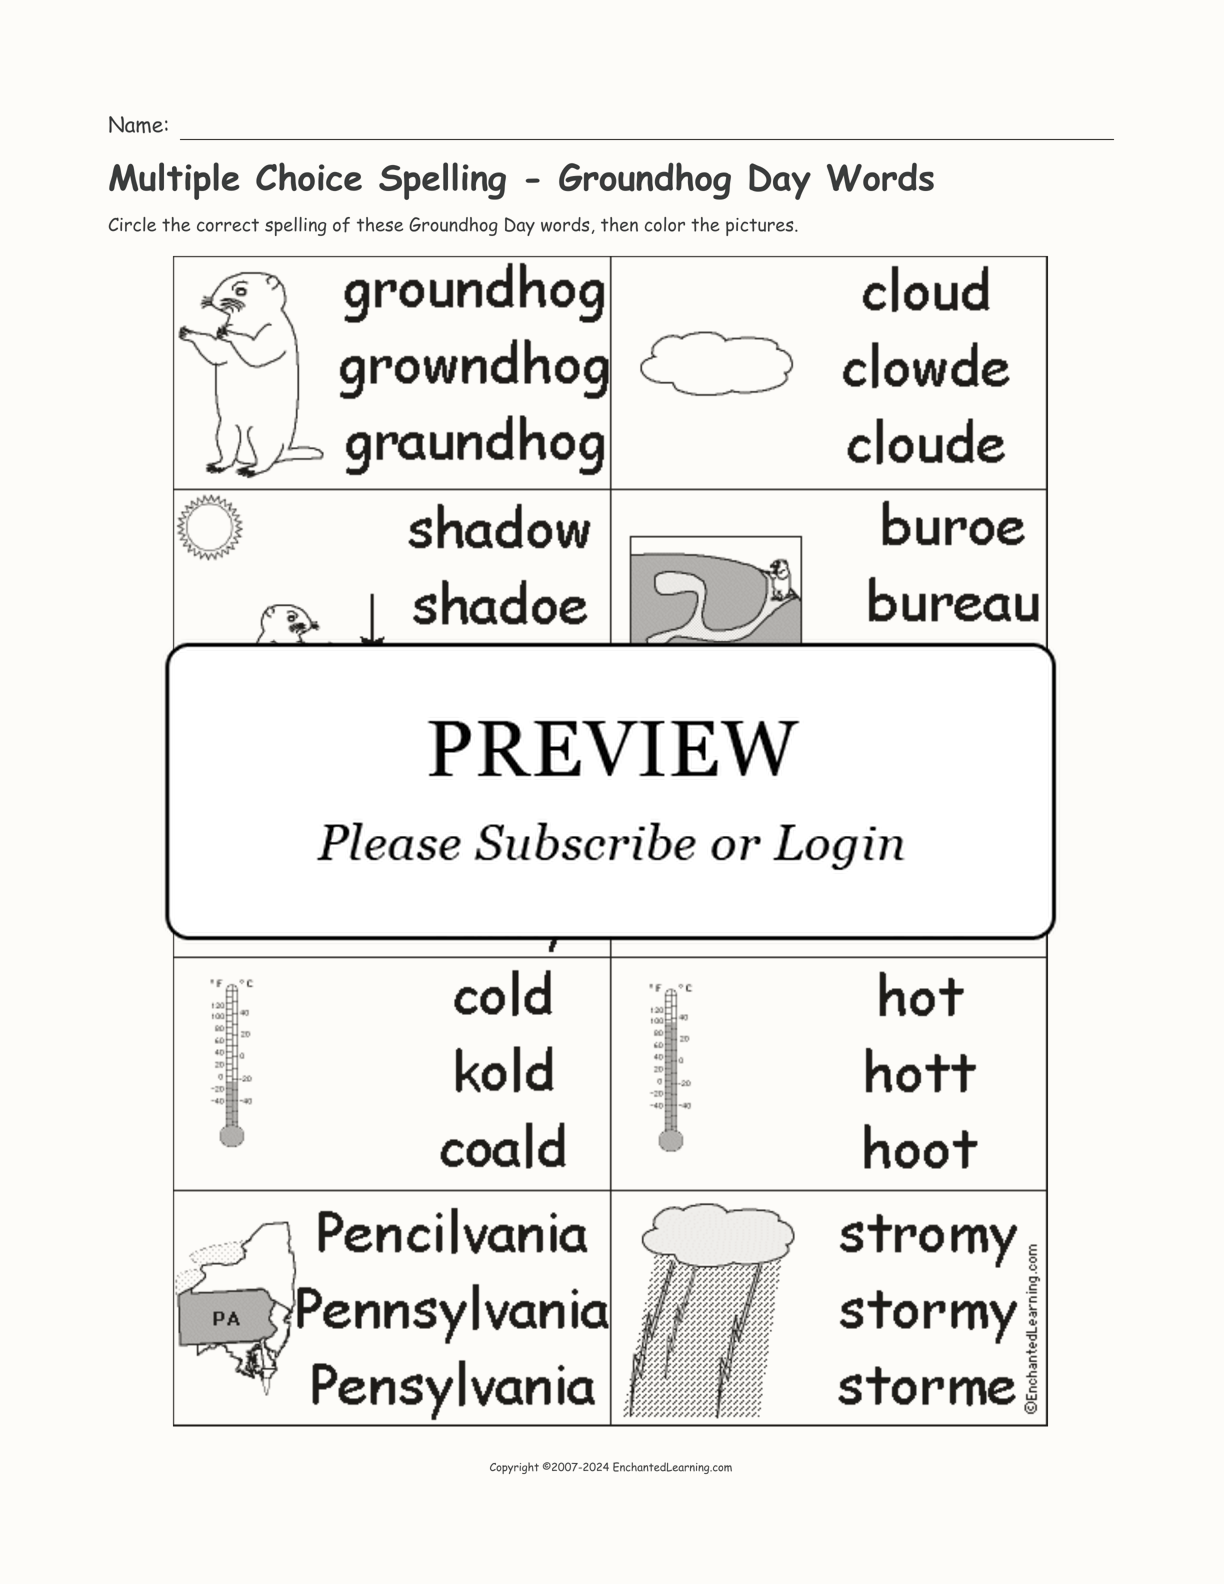 Multiple Choice Spelling - Groundhog Day Words interactive worksheet page 1